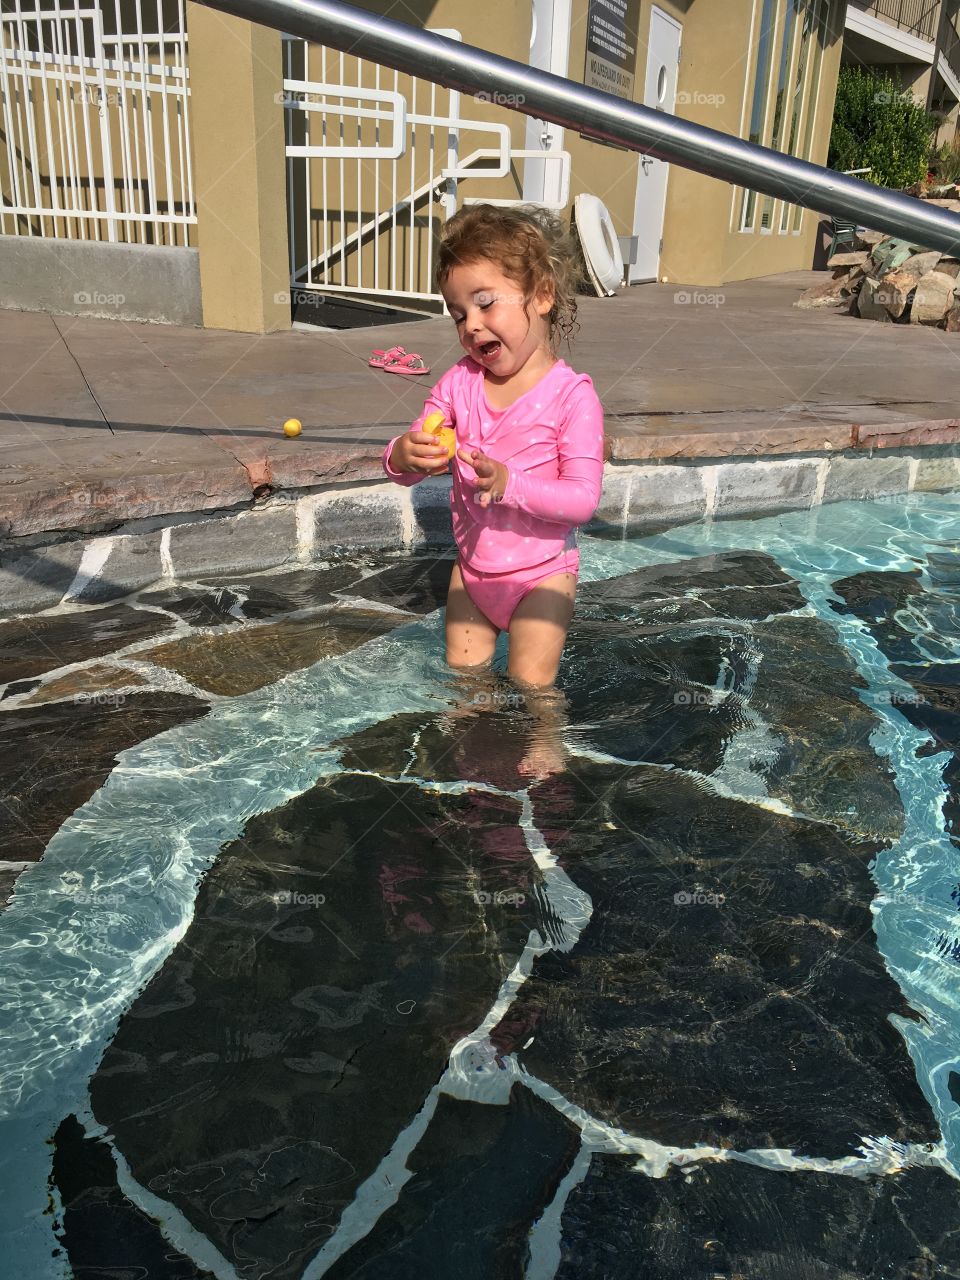 Singing in the pool.